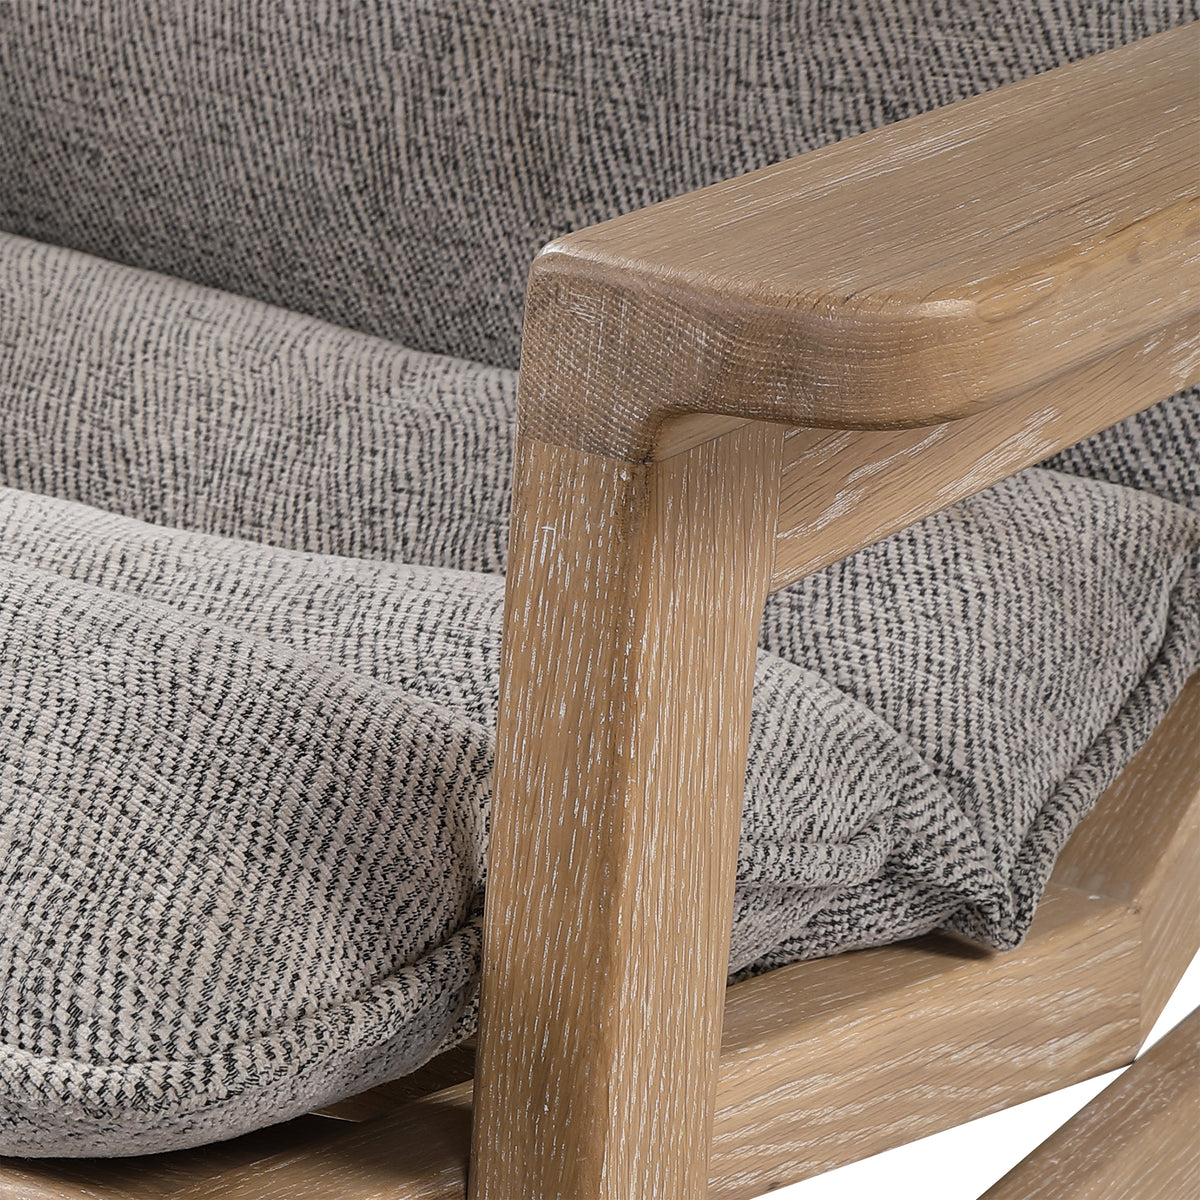 Isola Oak Accent Chair